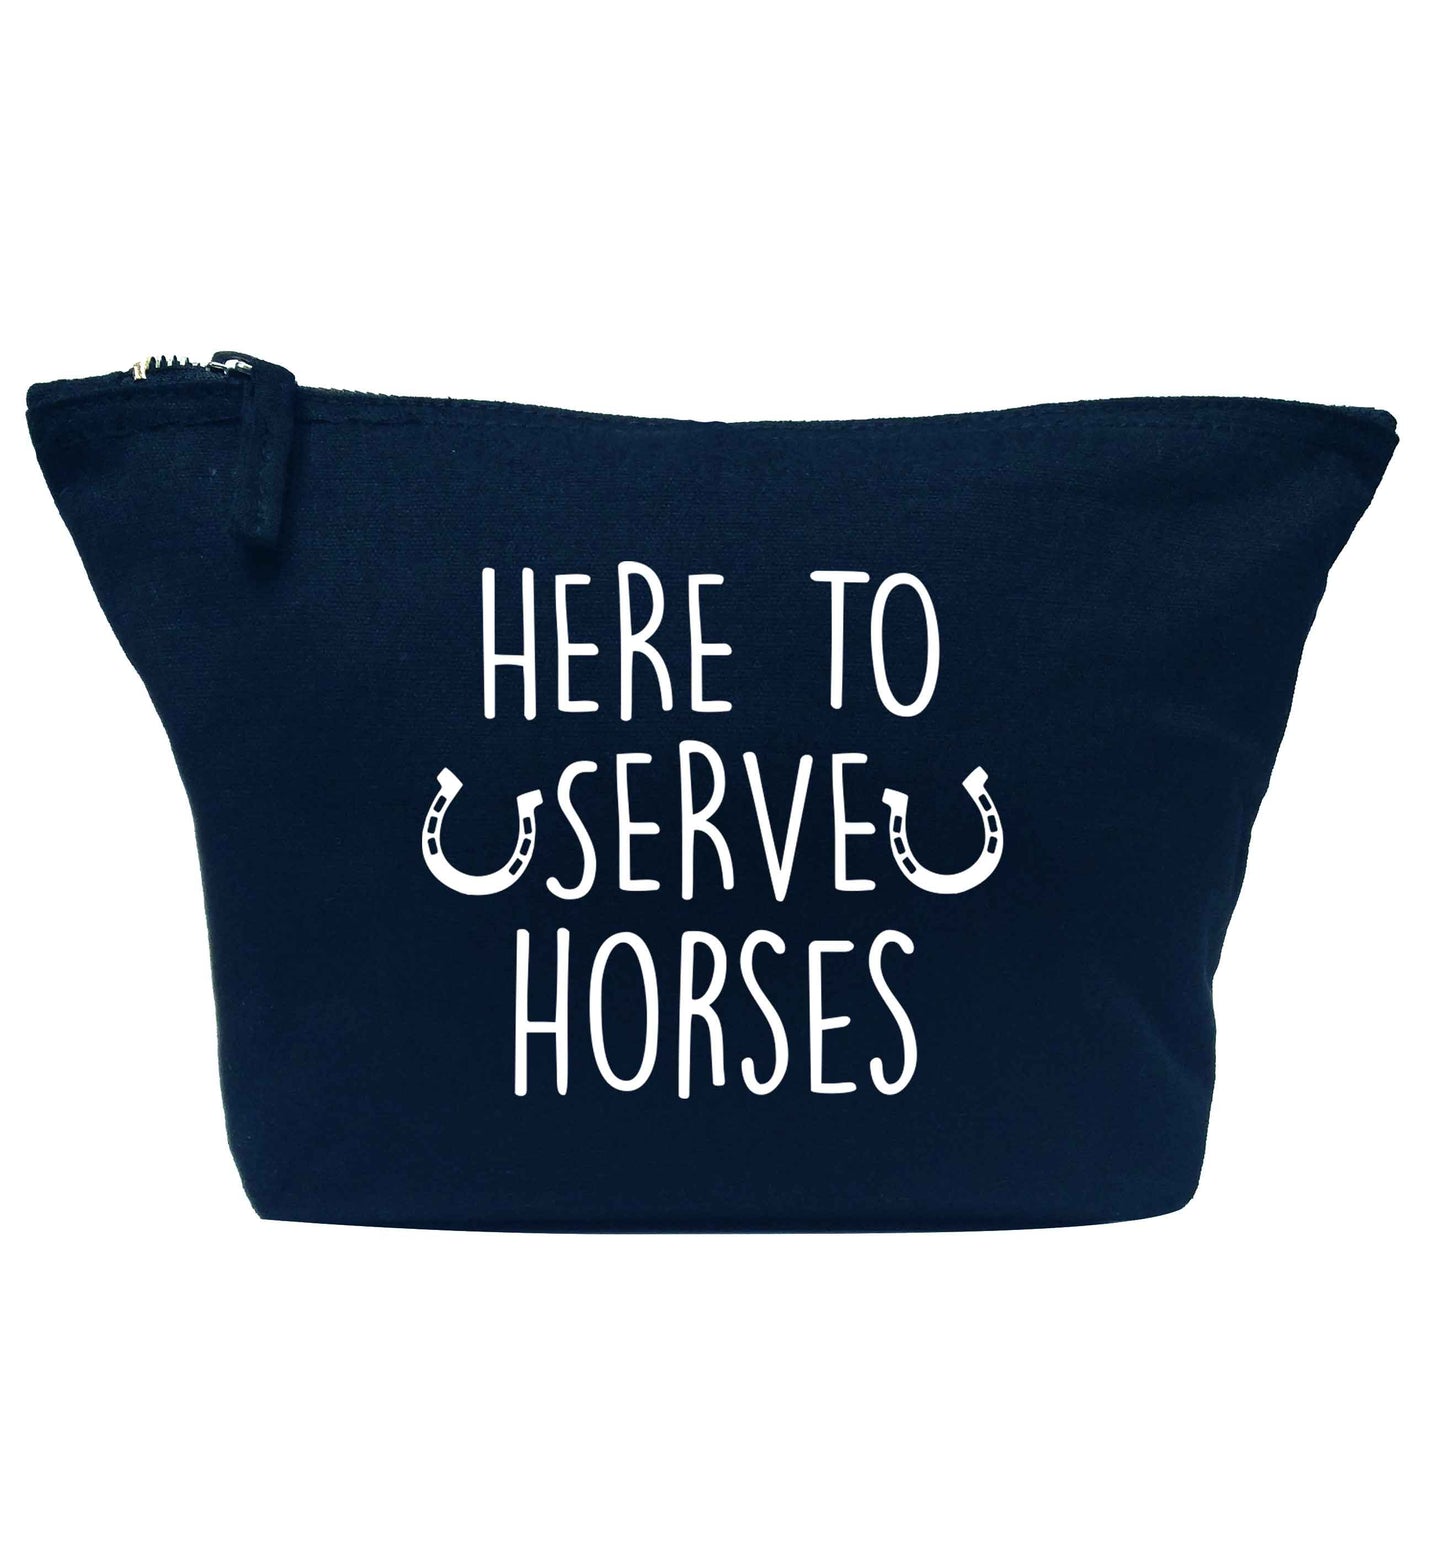 Here to serve horses navy makeup bag